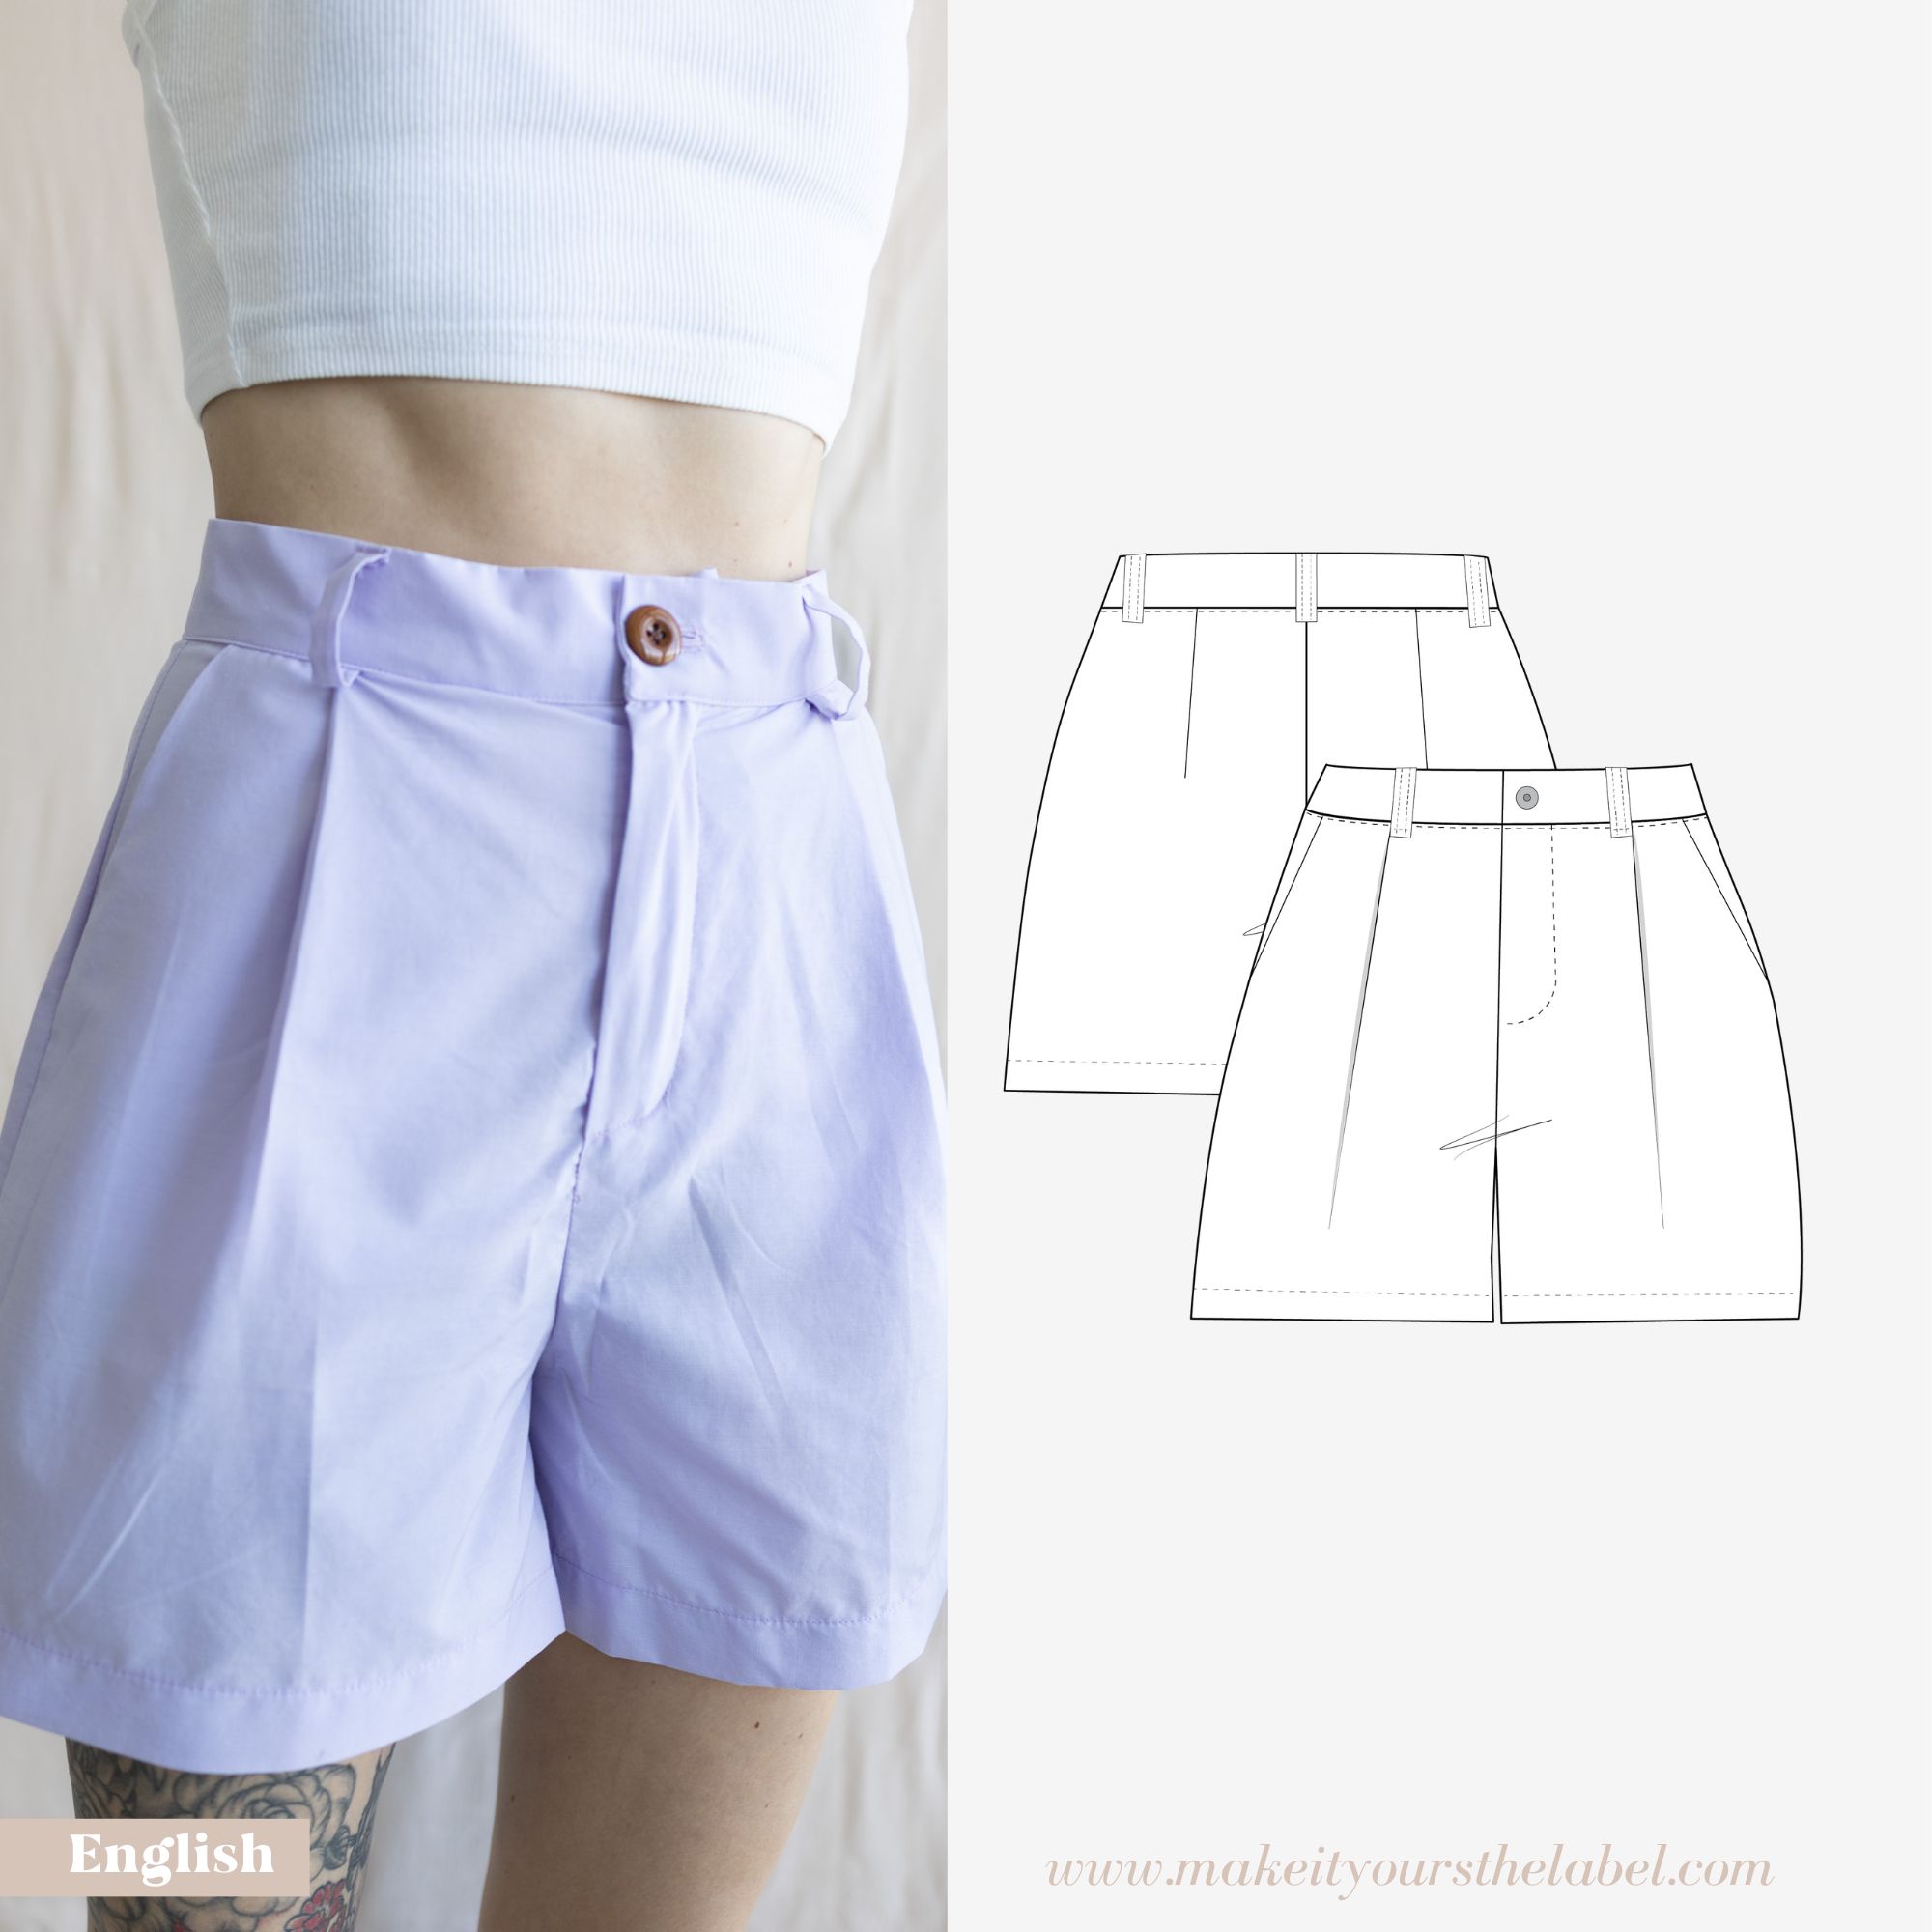 https://makeityoursthelabel.com/wp-content/uploads/2023/05/short_tailored-pants_pdf-sewing-pattern.jpg